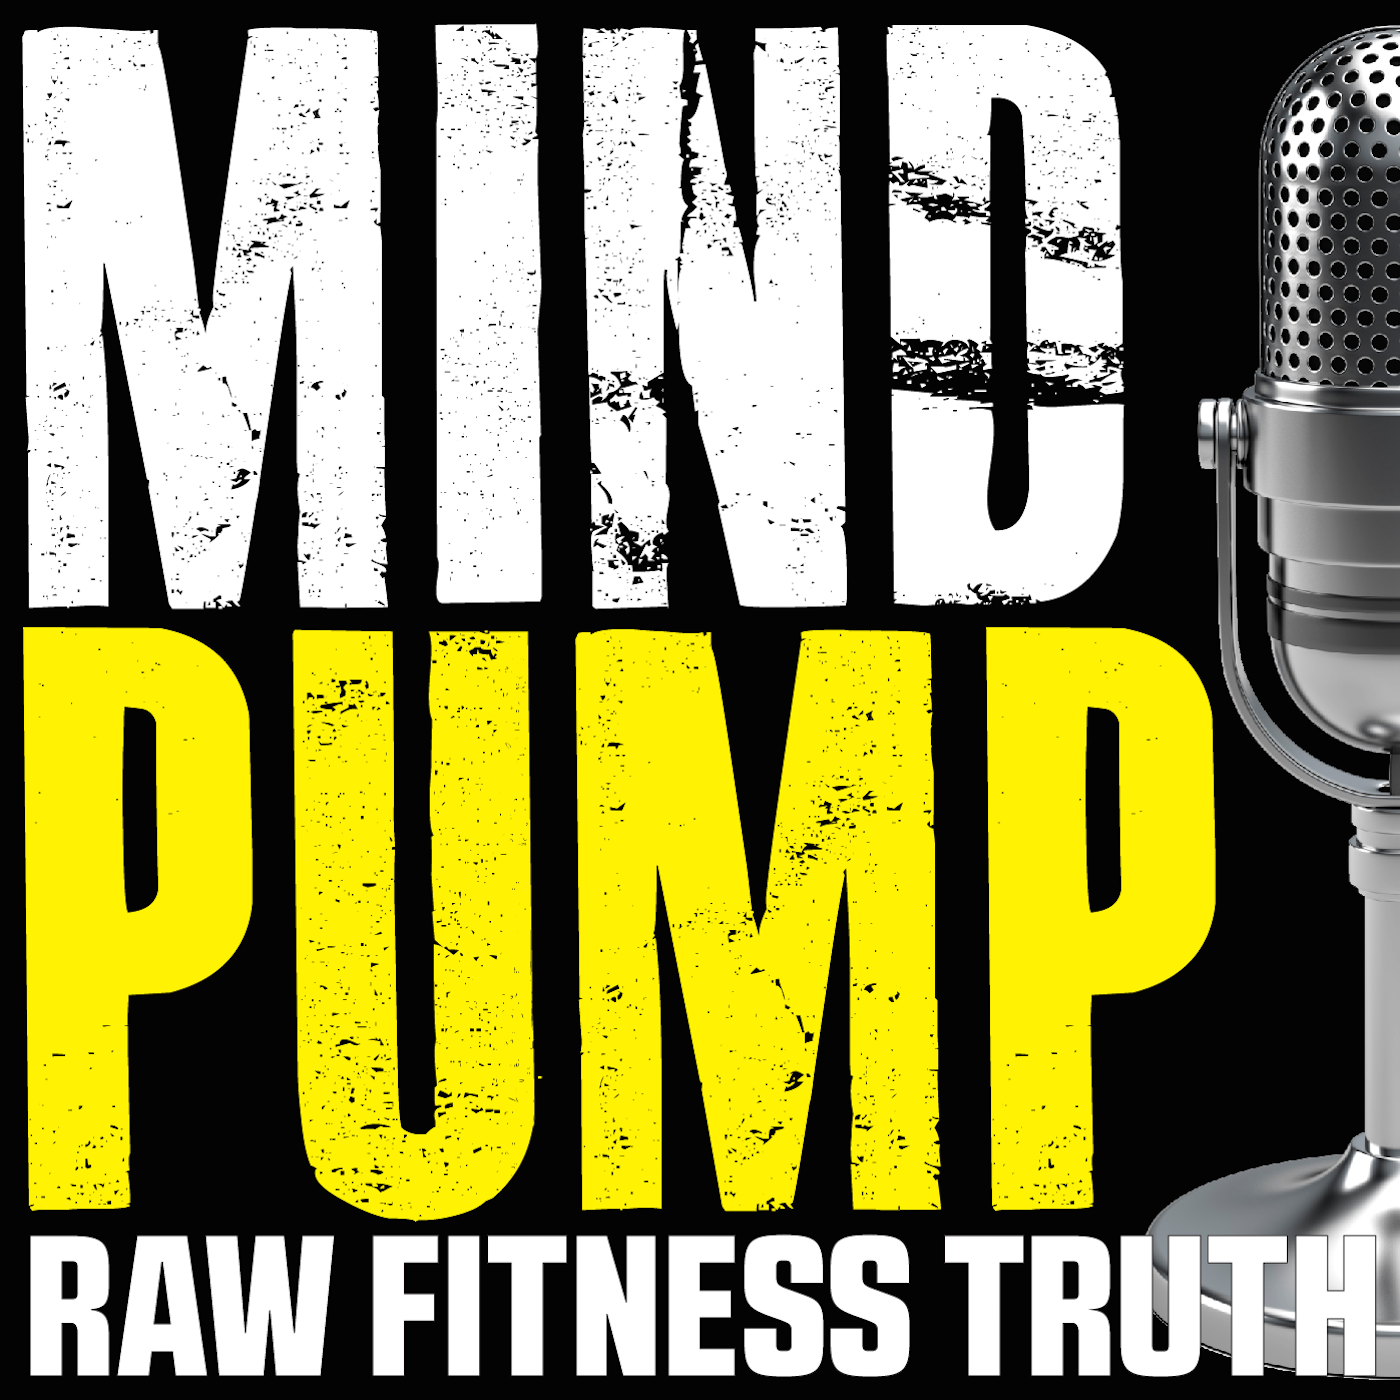 396: Getting Better at Push-Ups, Counting Macros, Superiority of Free Range Meat & MORE